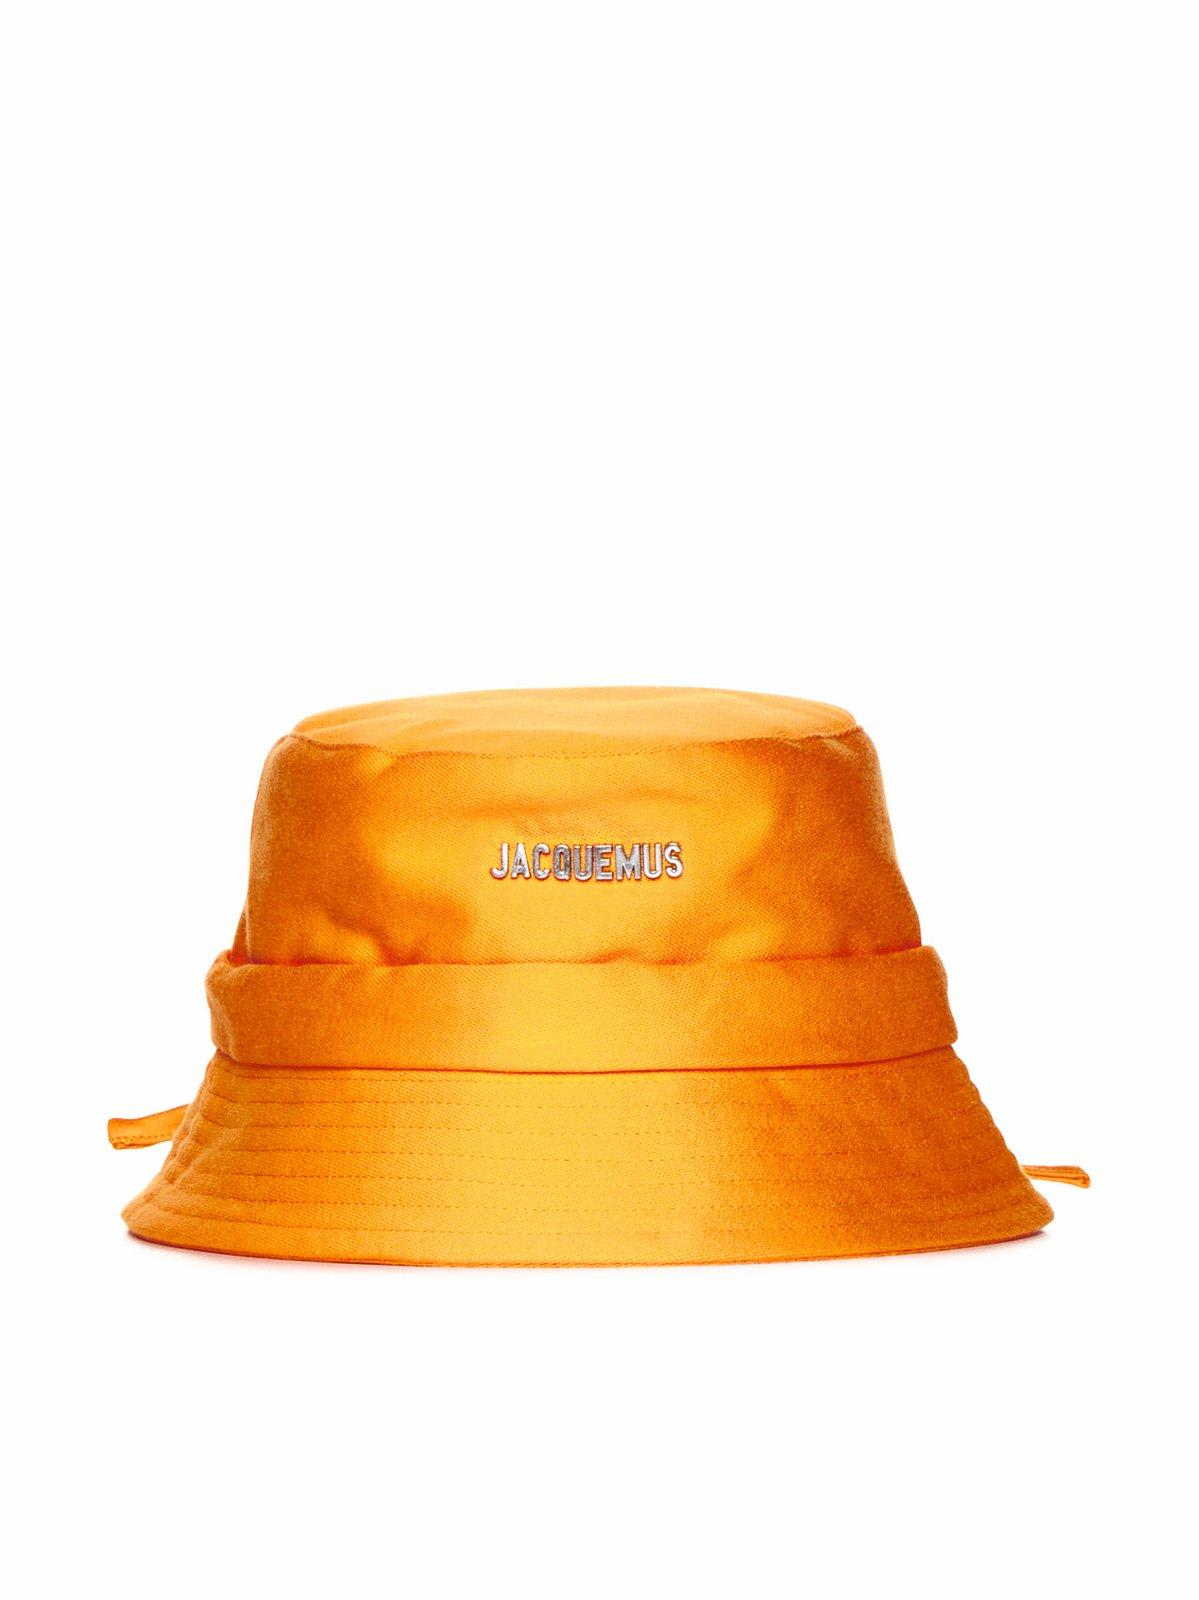 Jacquemus Le Bob Gadjo Knotted Bucket Hat